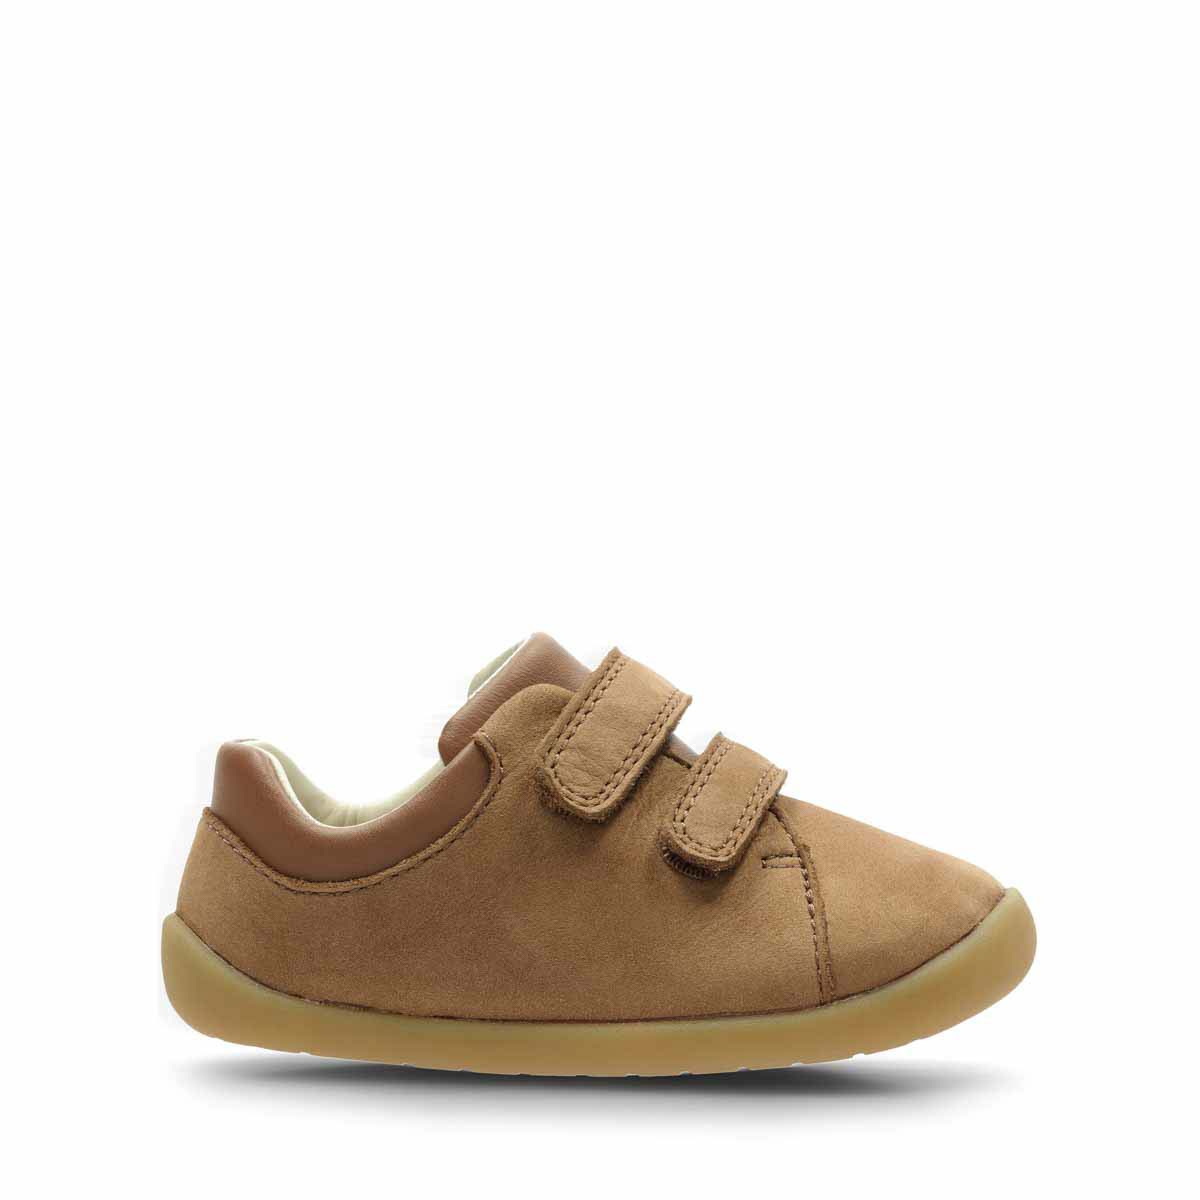 Clarks Roamer Craft T H Fit Tan Leather 